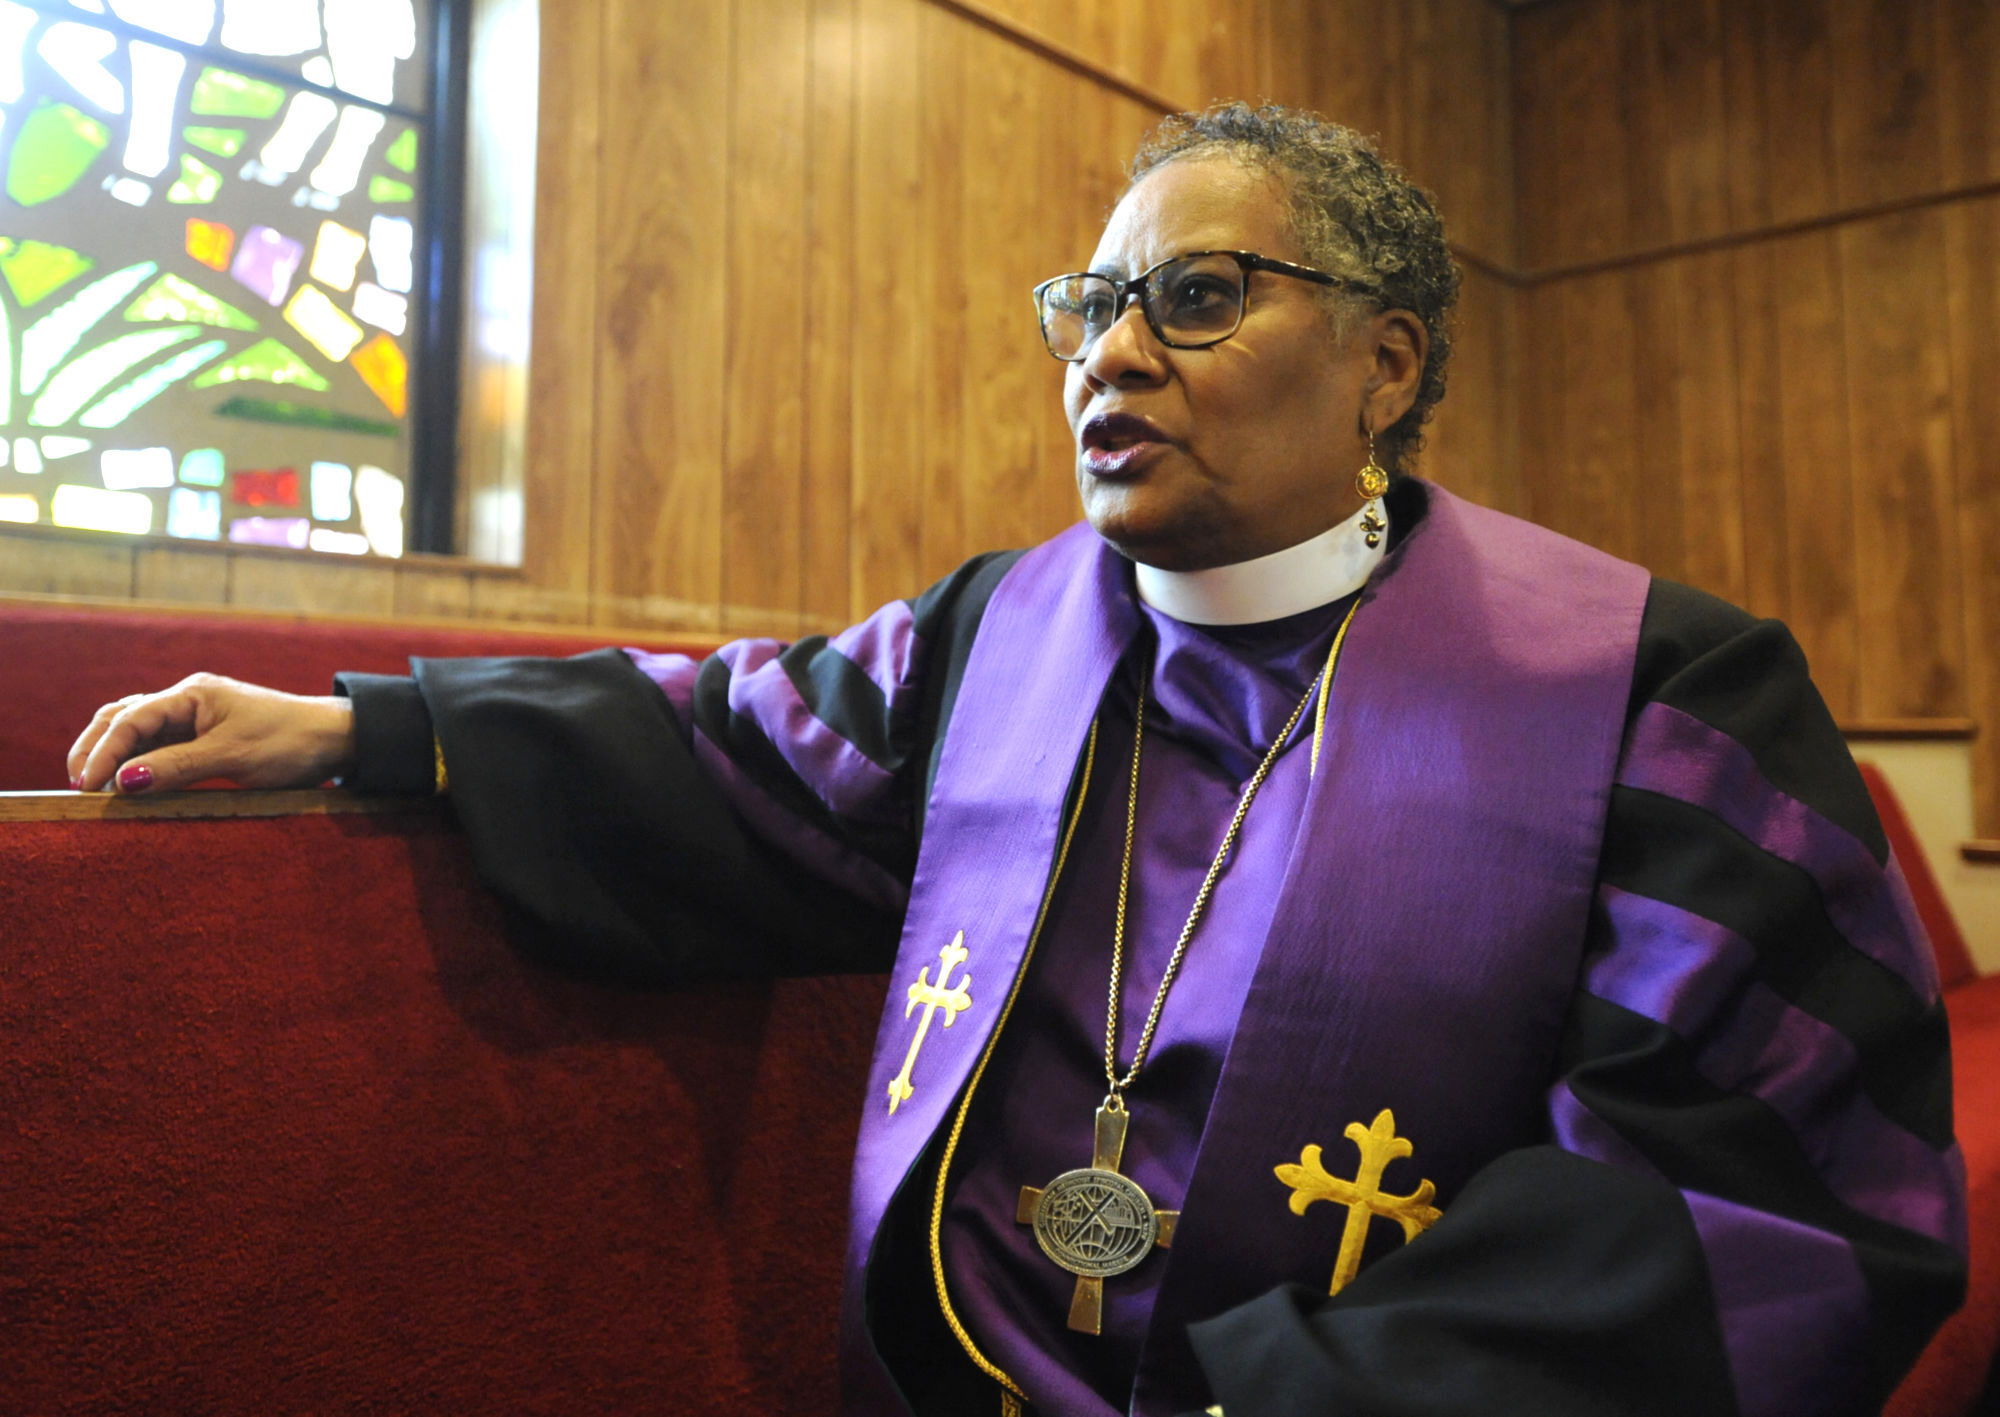 Bishop Teresa Jefferson-Snorton of the Christian Methodist Episcopal Church is shown at Moody Temple CME Church in Fairfield, Ala., on Tuesday, Nov. 16, 2021. Jefferson-Snorton is the CME Church's first and only woman bishop. (AP Photo/Jay Reeves)